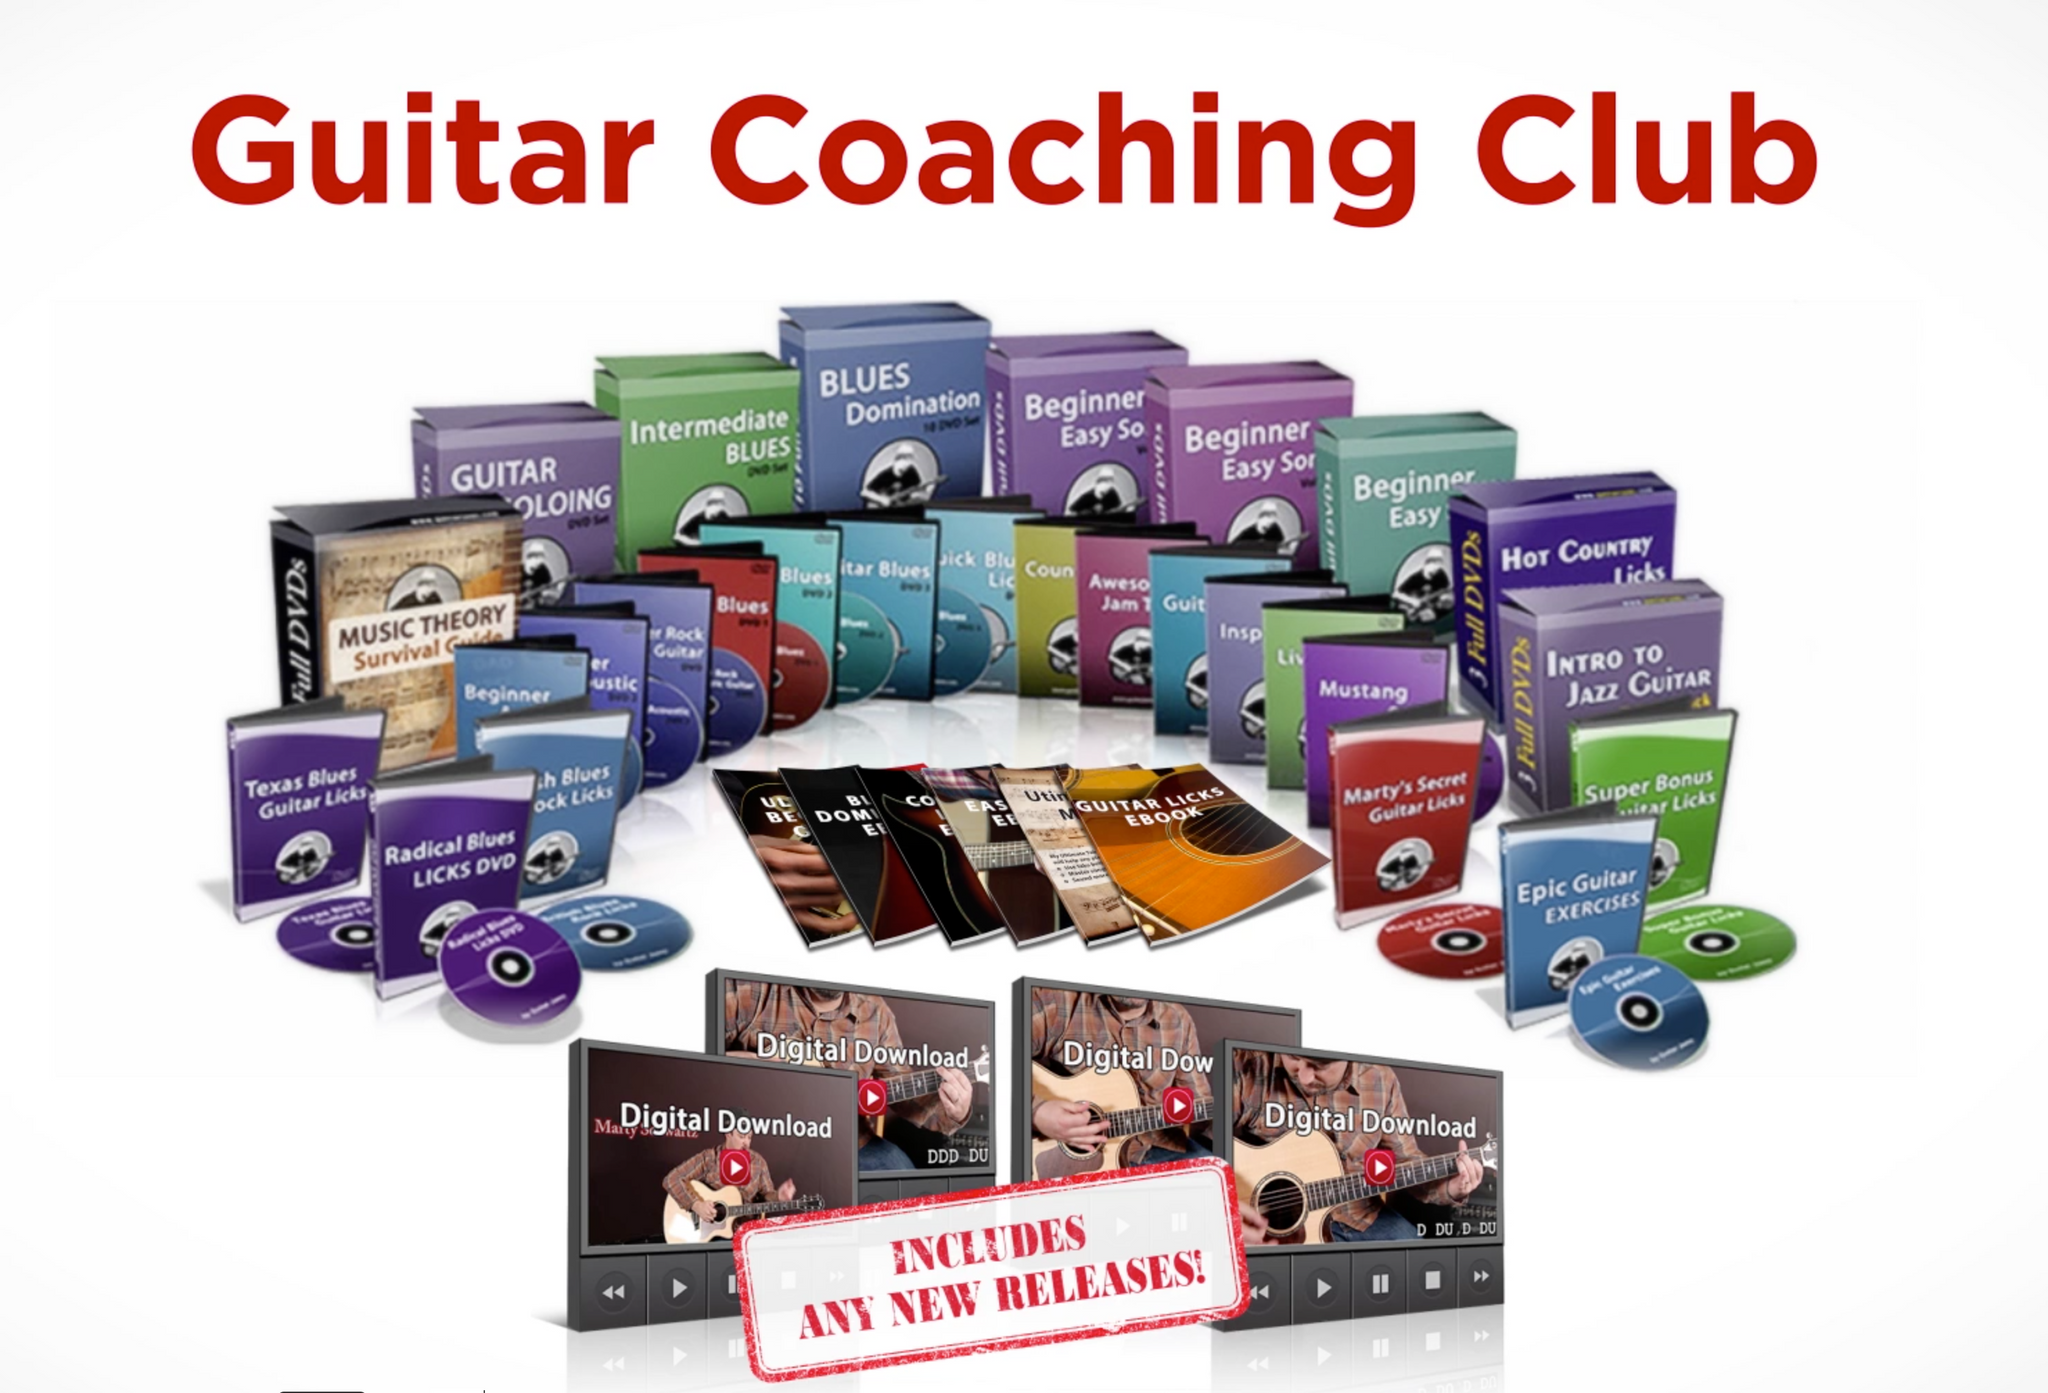 [SPECIAL] GuitarJamz's Guitar Coaching Club with LIFETIME Membership - You get EVERYTHING!